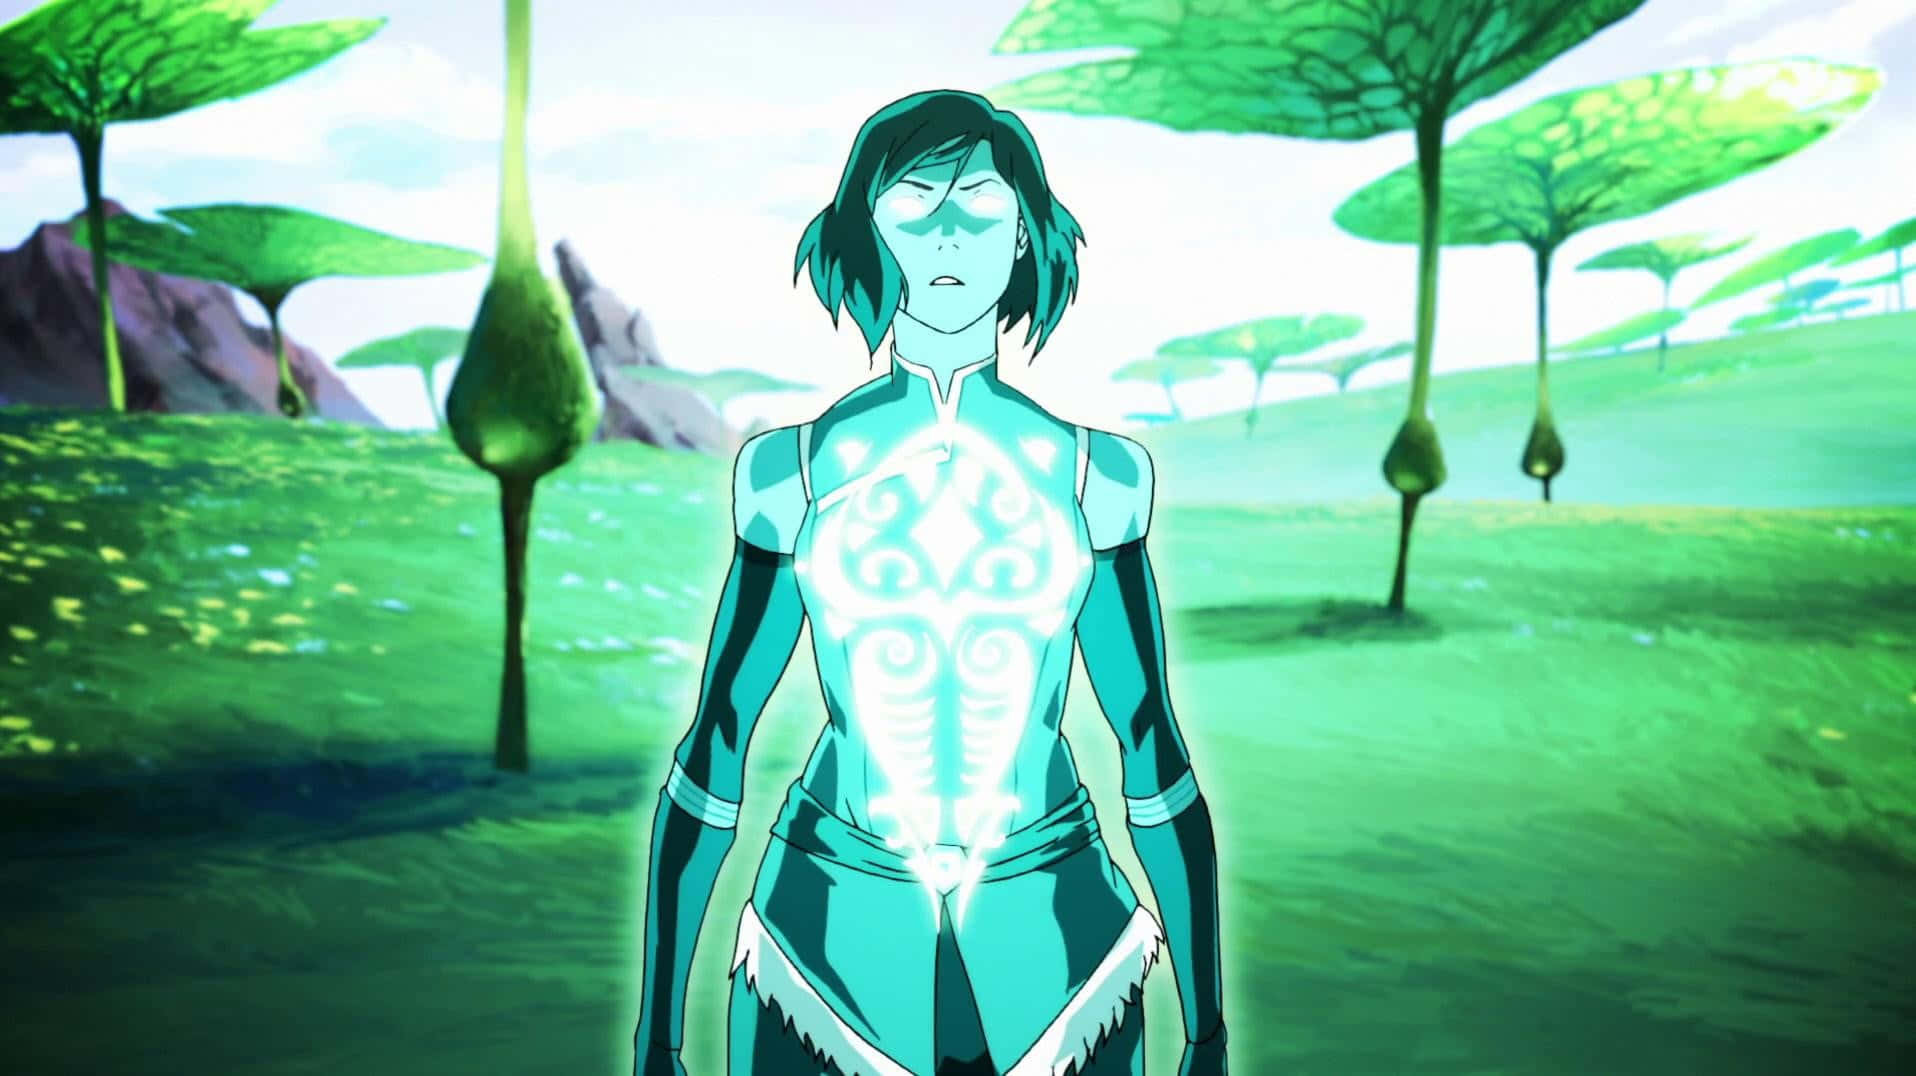 Korra Taking Action To Protect The Avatar Background